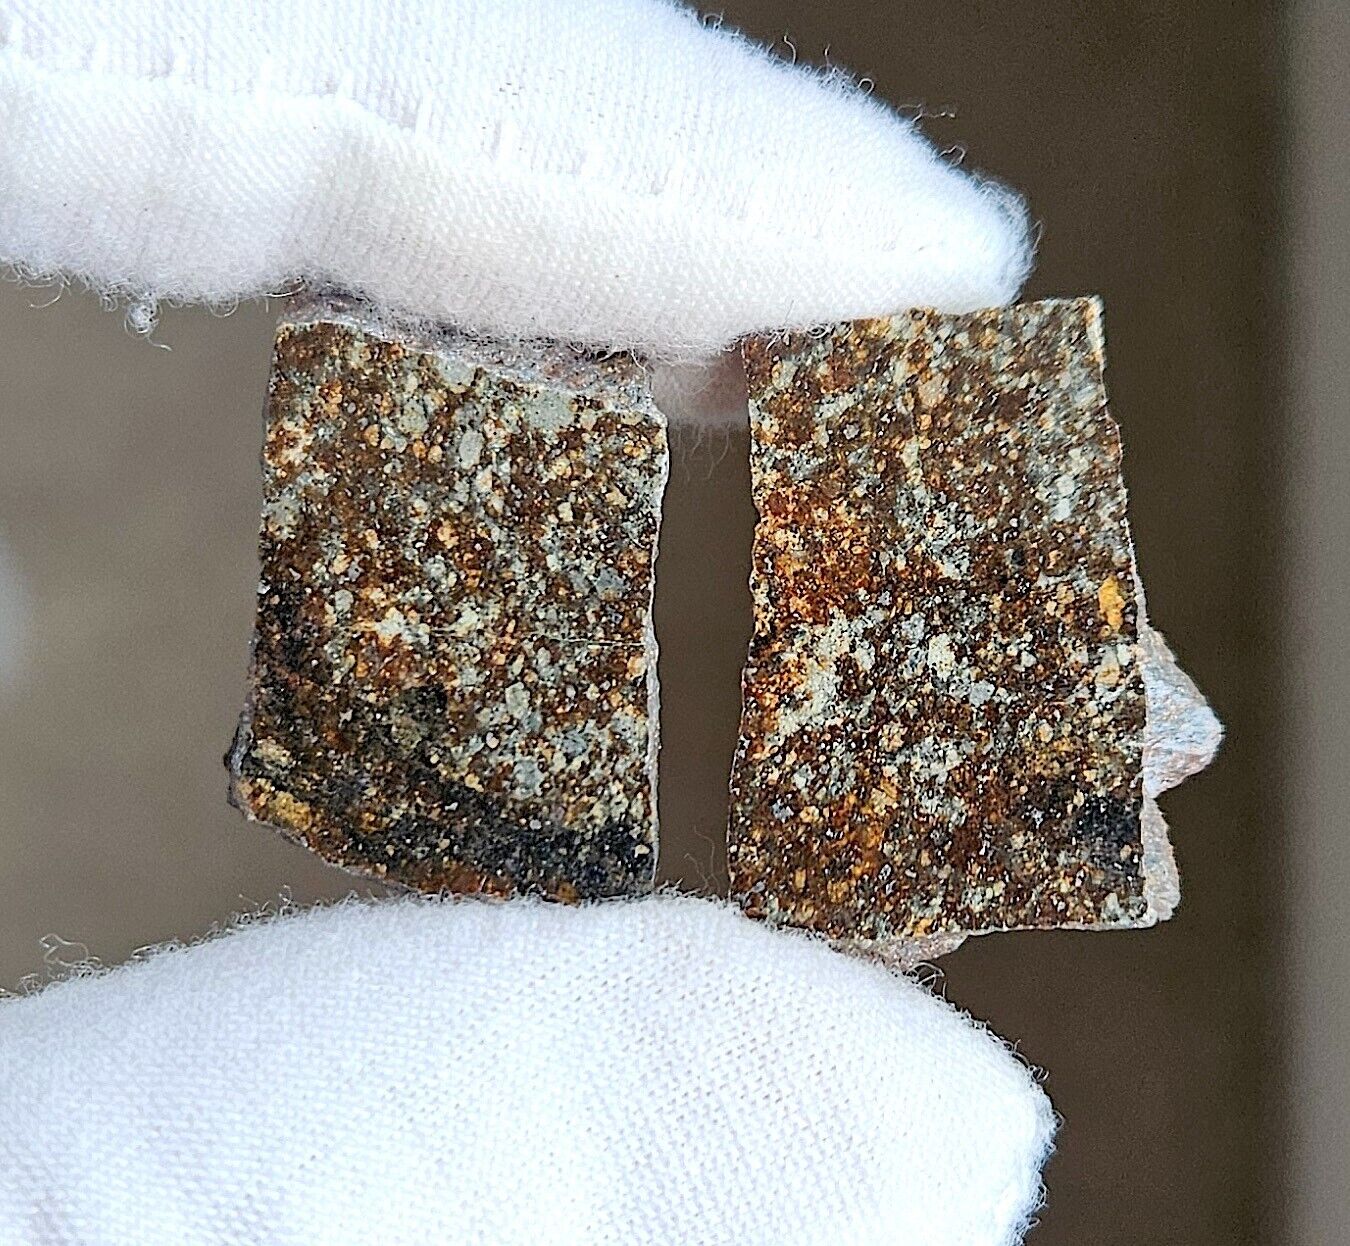 Meteorite NWA 869, L3-6 Chondrite, Two Polished Slices, 13.86g. 1 of 62